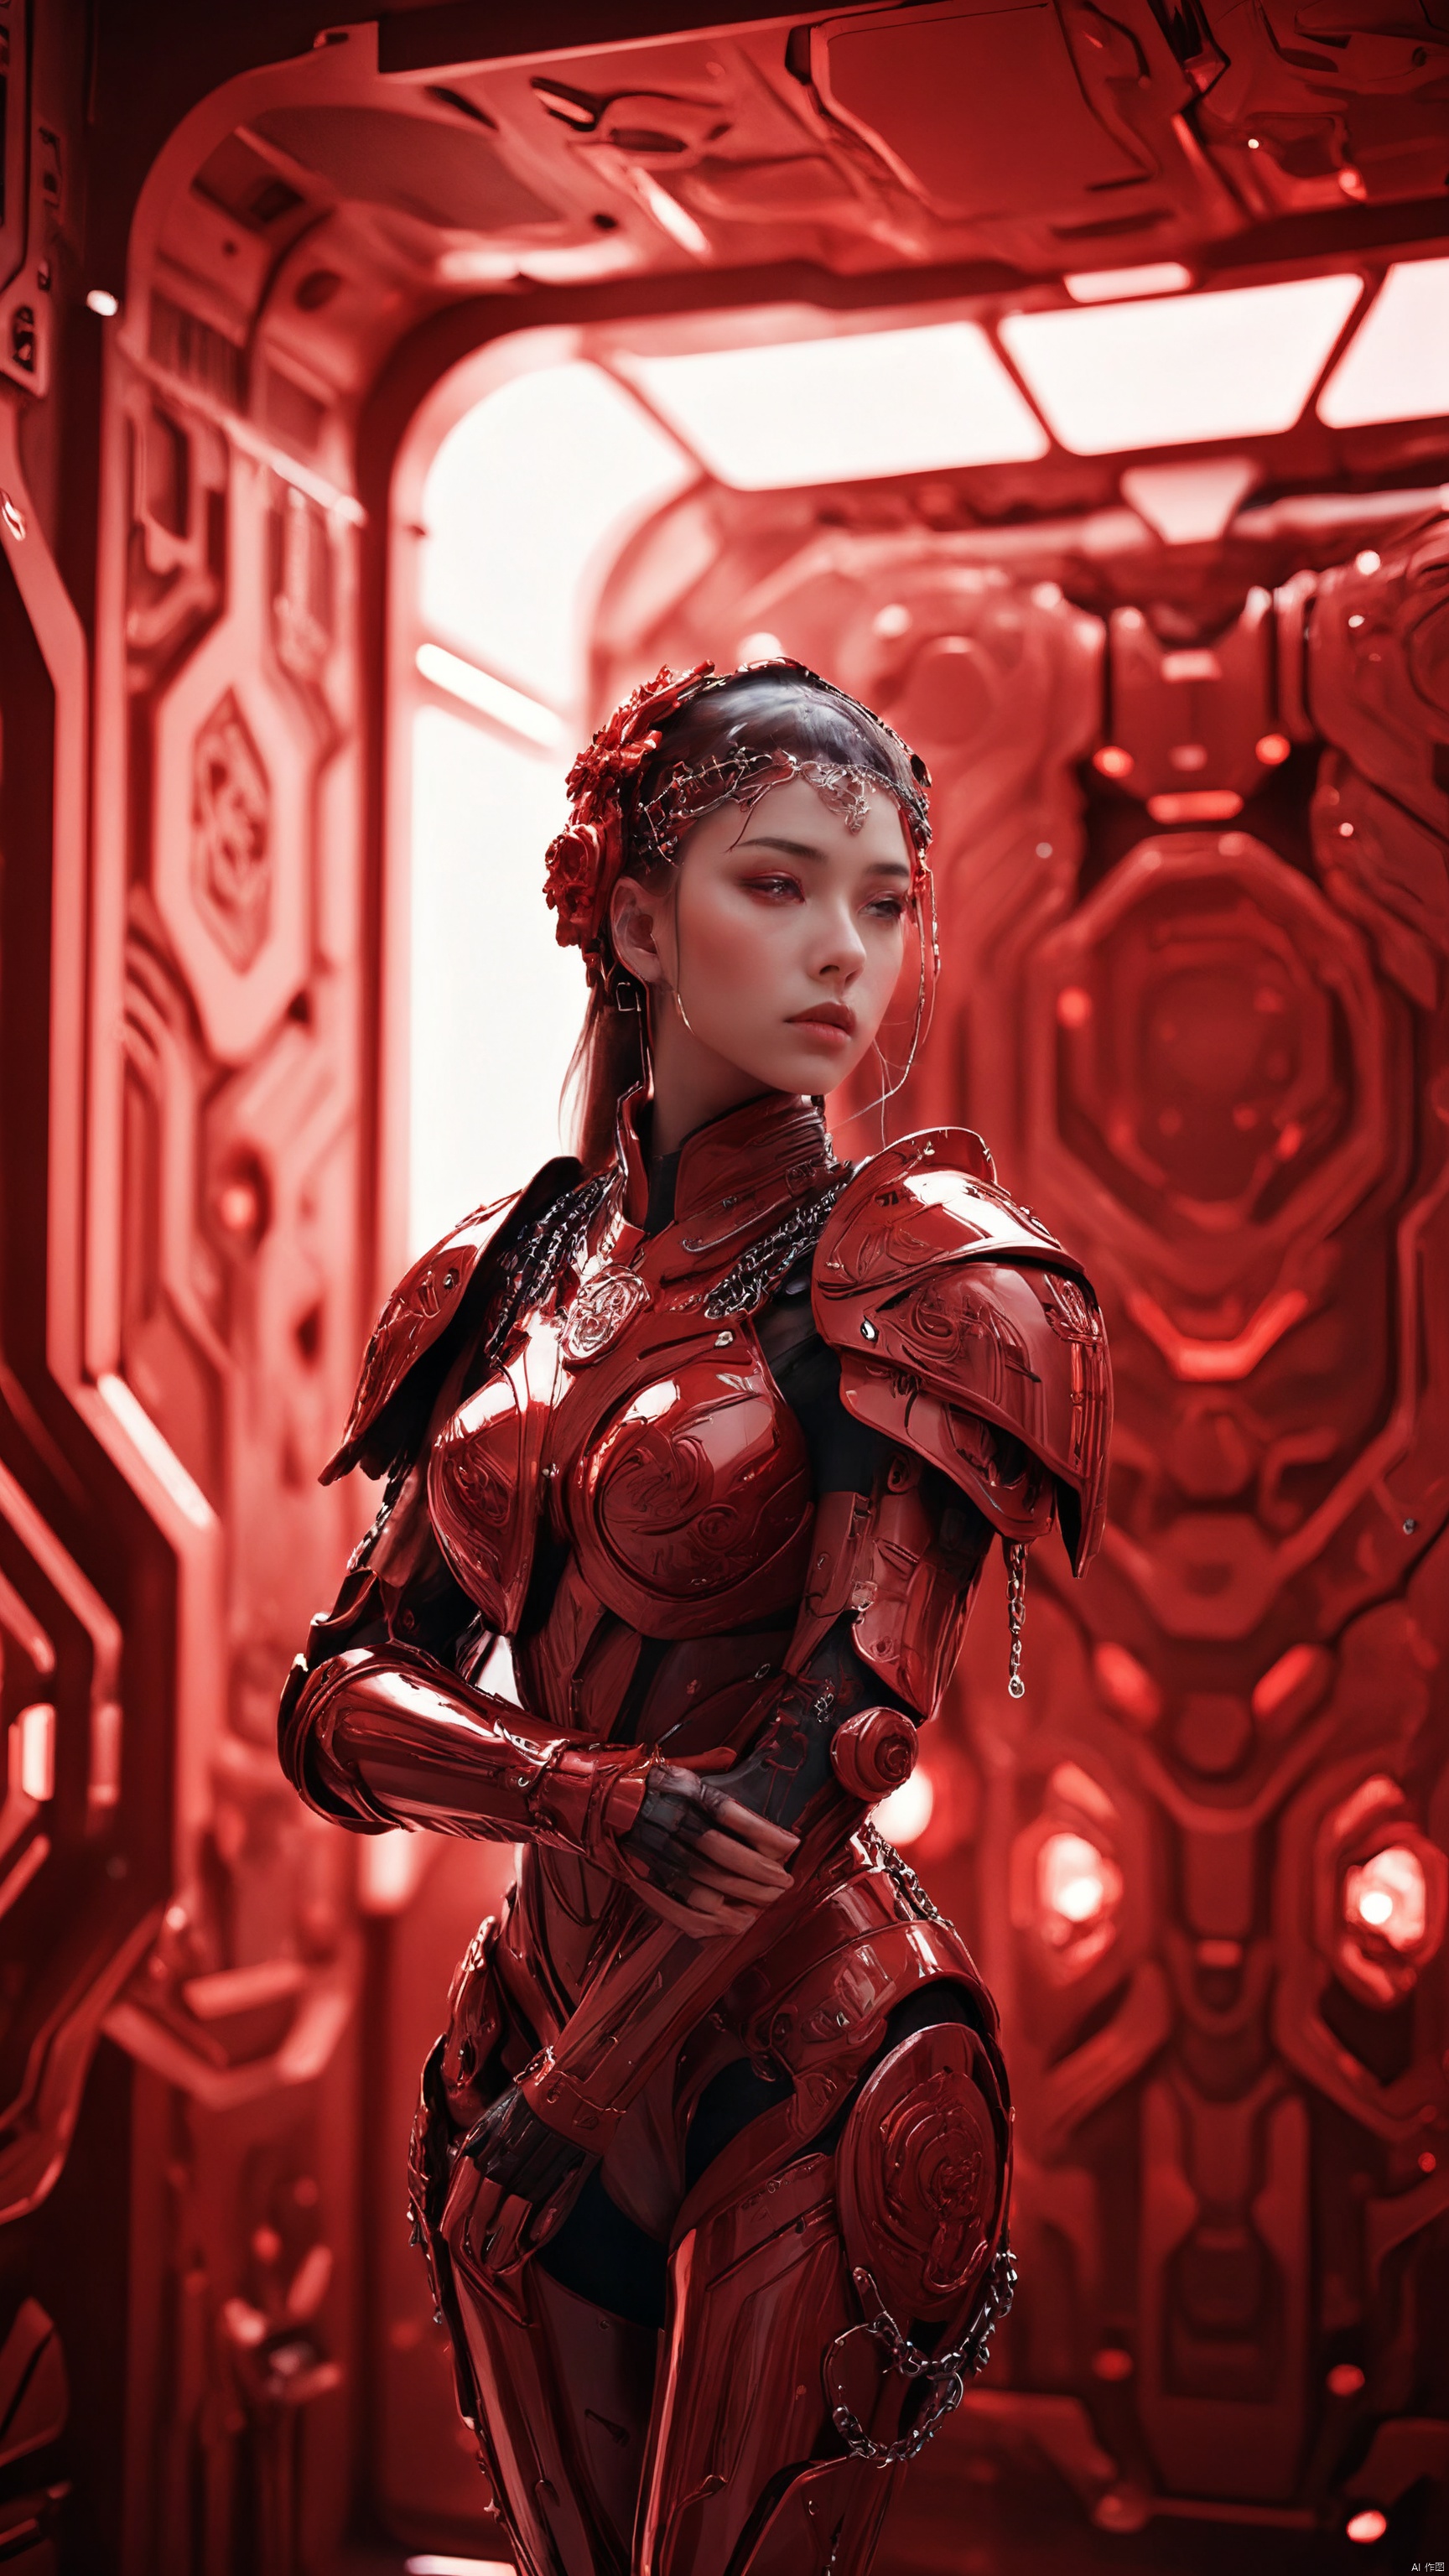  A contemplative female warrior in elaborate red mech-style armor, glossy with intricate designs including floral patterns and chains, inside a futuristic corridor with soft red ambient lighting, sleek and polished look of advanced technology, reflective armor catching the light, high contrast with dark background, best quality, ultra highres, original, extremely detailed, perfect lighting